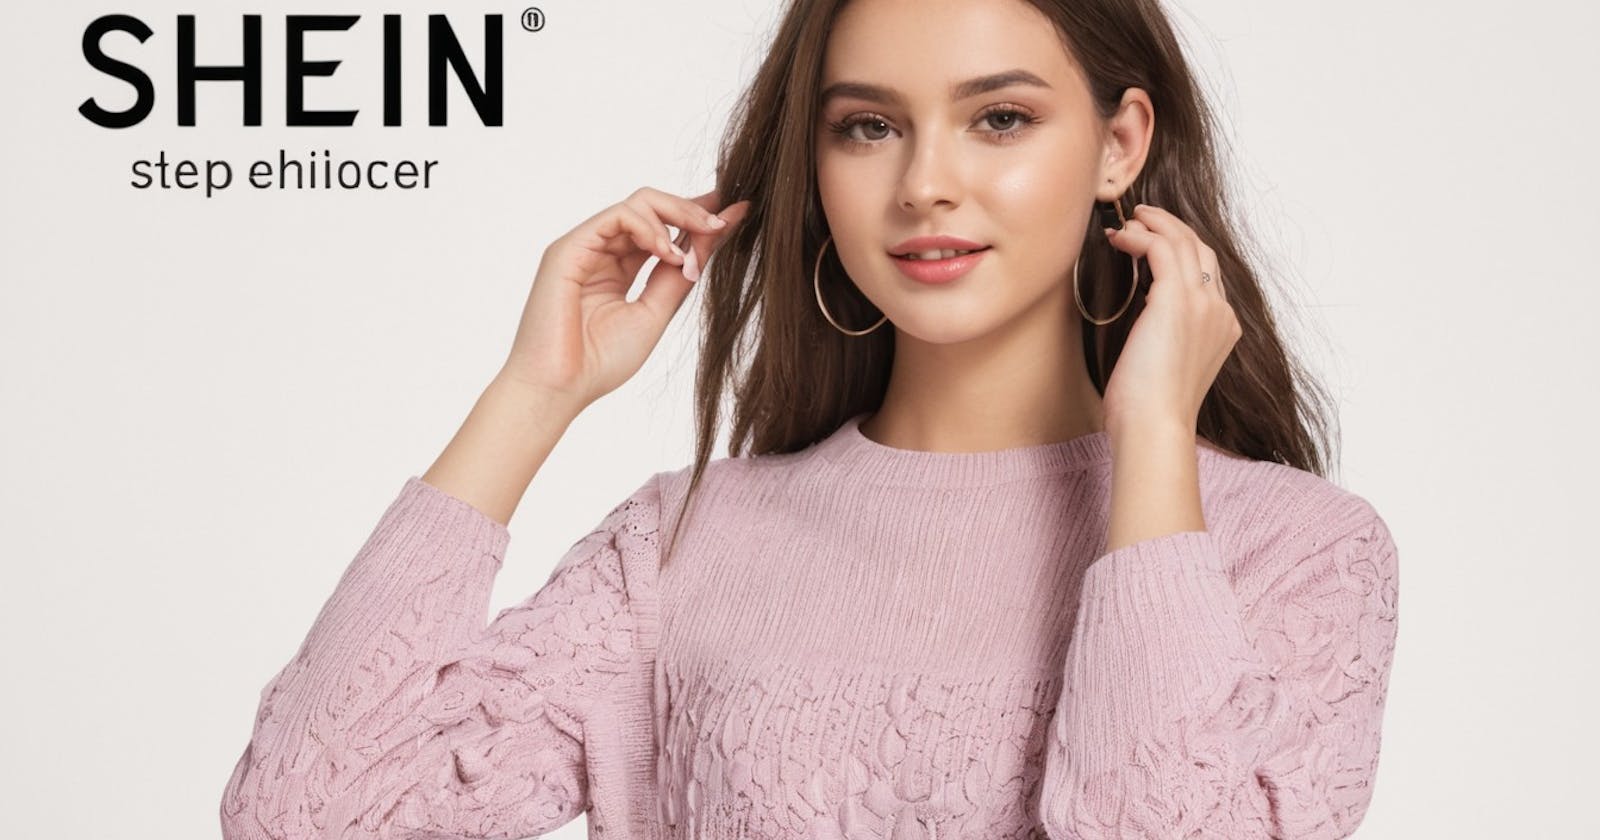 How to Build A Leading Shopping Marketplace: Learning from the Success Story of Shein